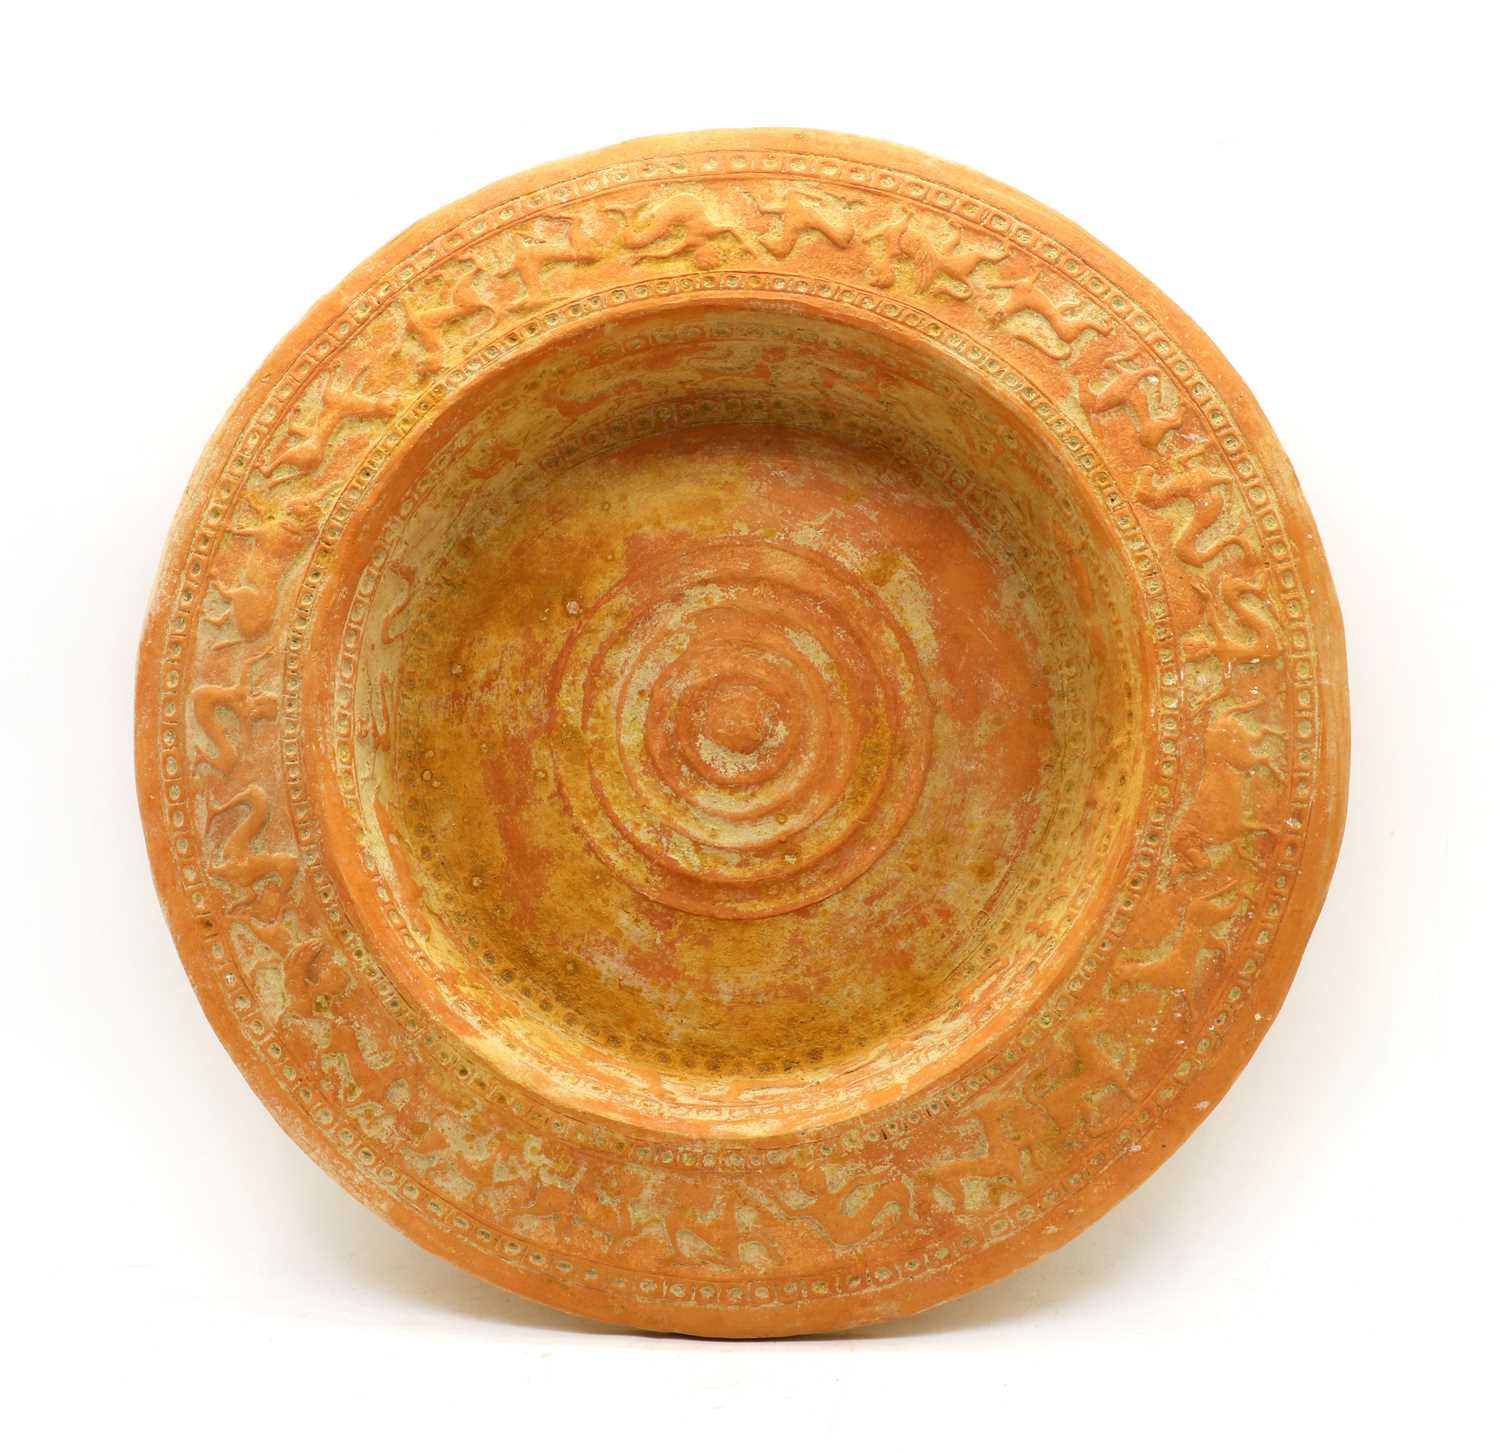 Lot 94 - A large terracotta redware dish